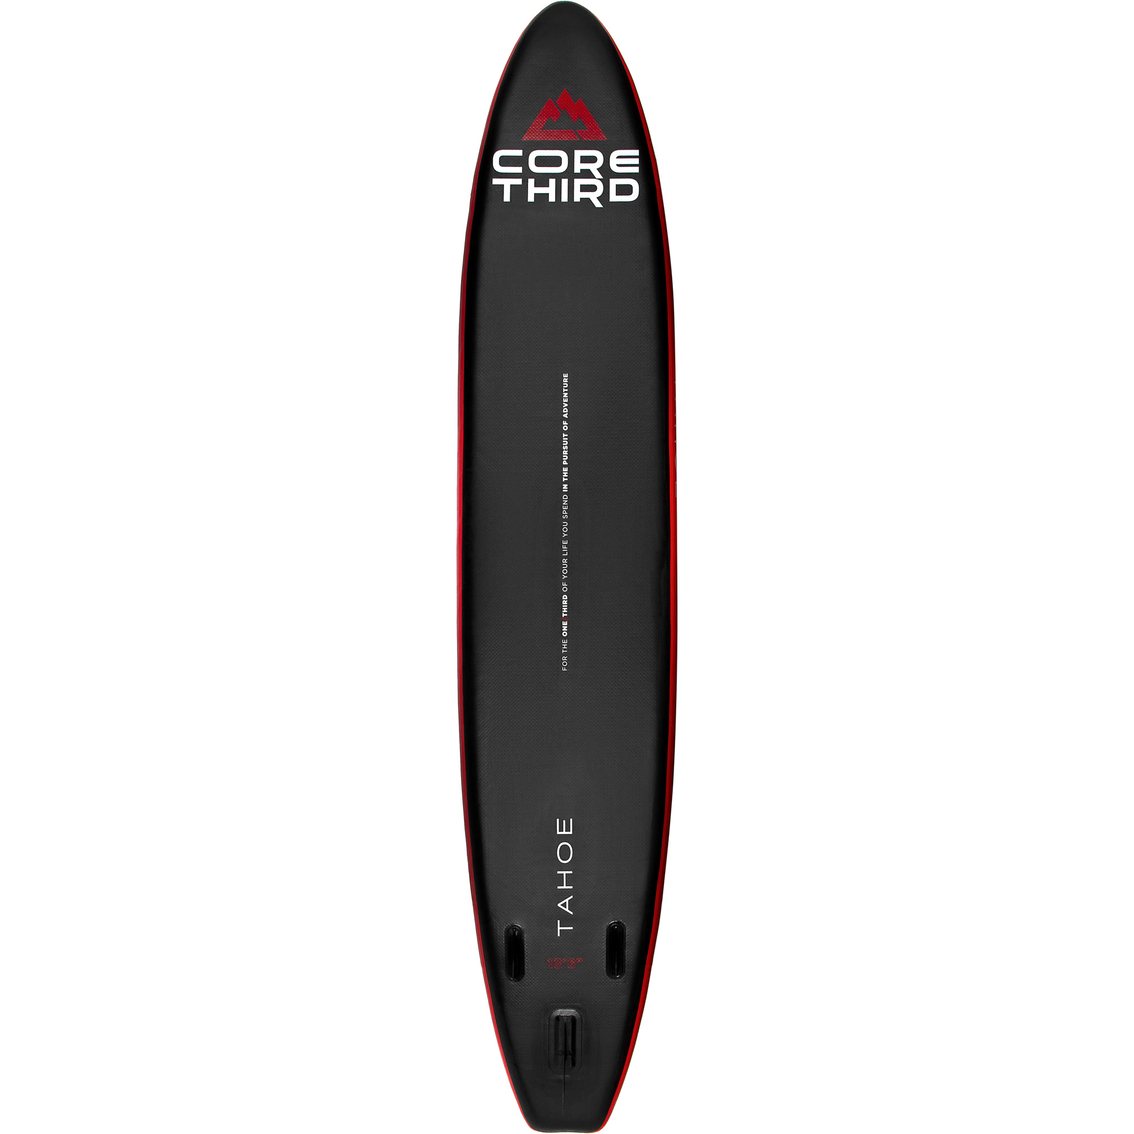 Core Third Tahoe Inflatable Paddle Board - Image 4 of 8